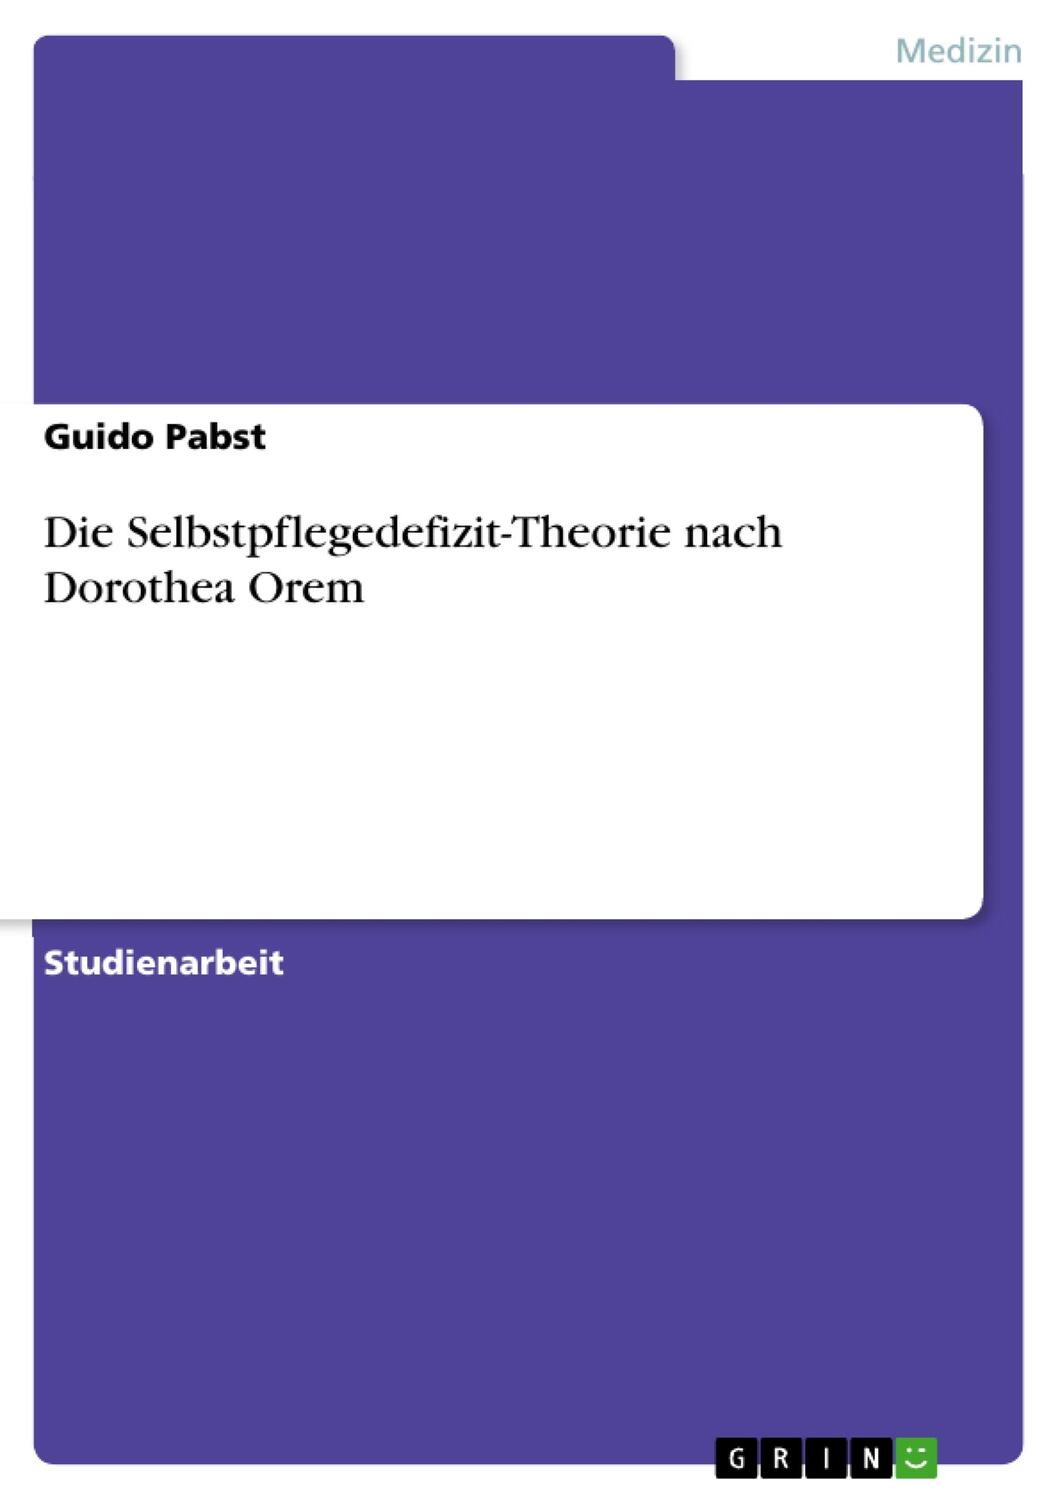 Cover: 9783640454143 | Die Selbstpflegedefizit-Theorie nach Dorothea Orem | Guido Pabst